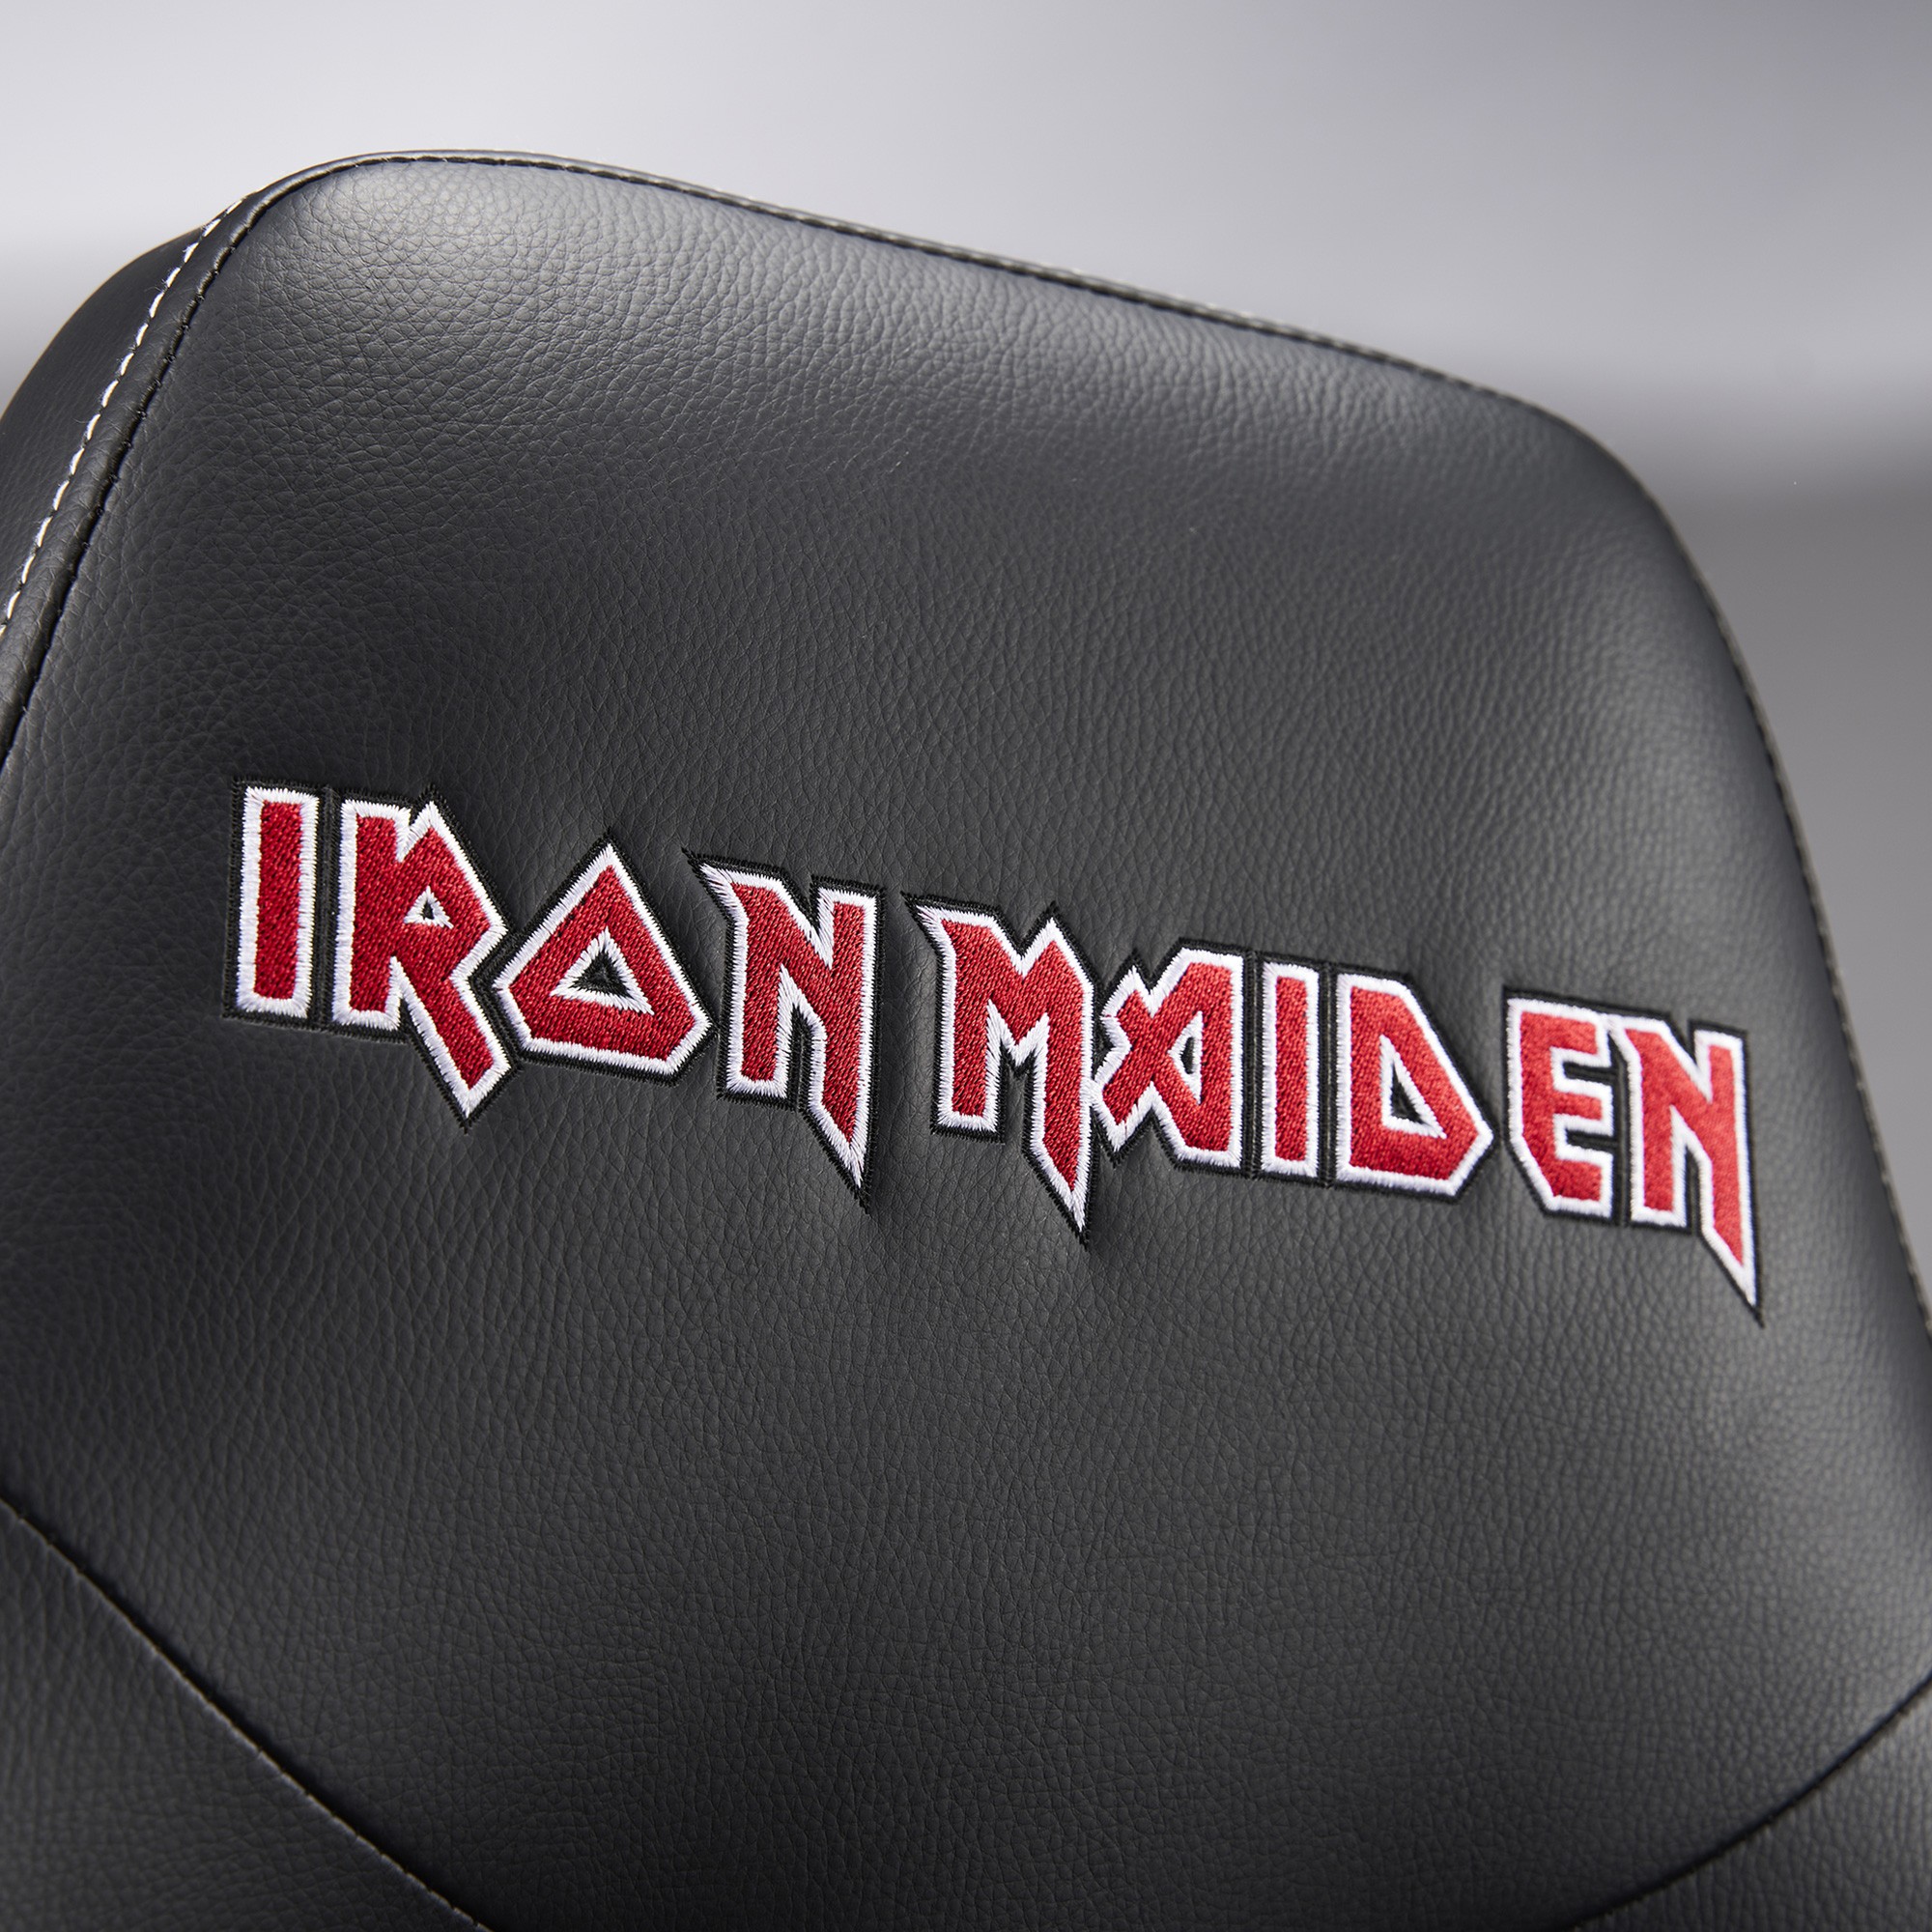 Gaming chair Iron Maiden - The Number of the Beast